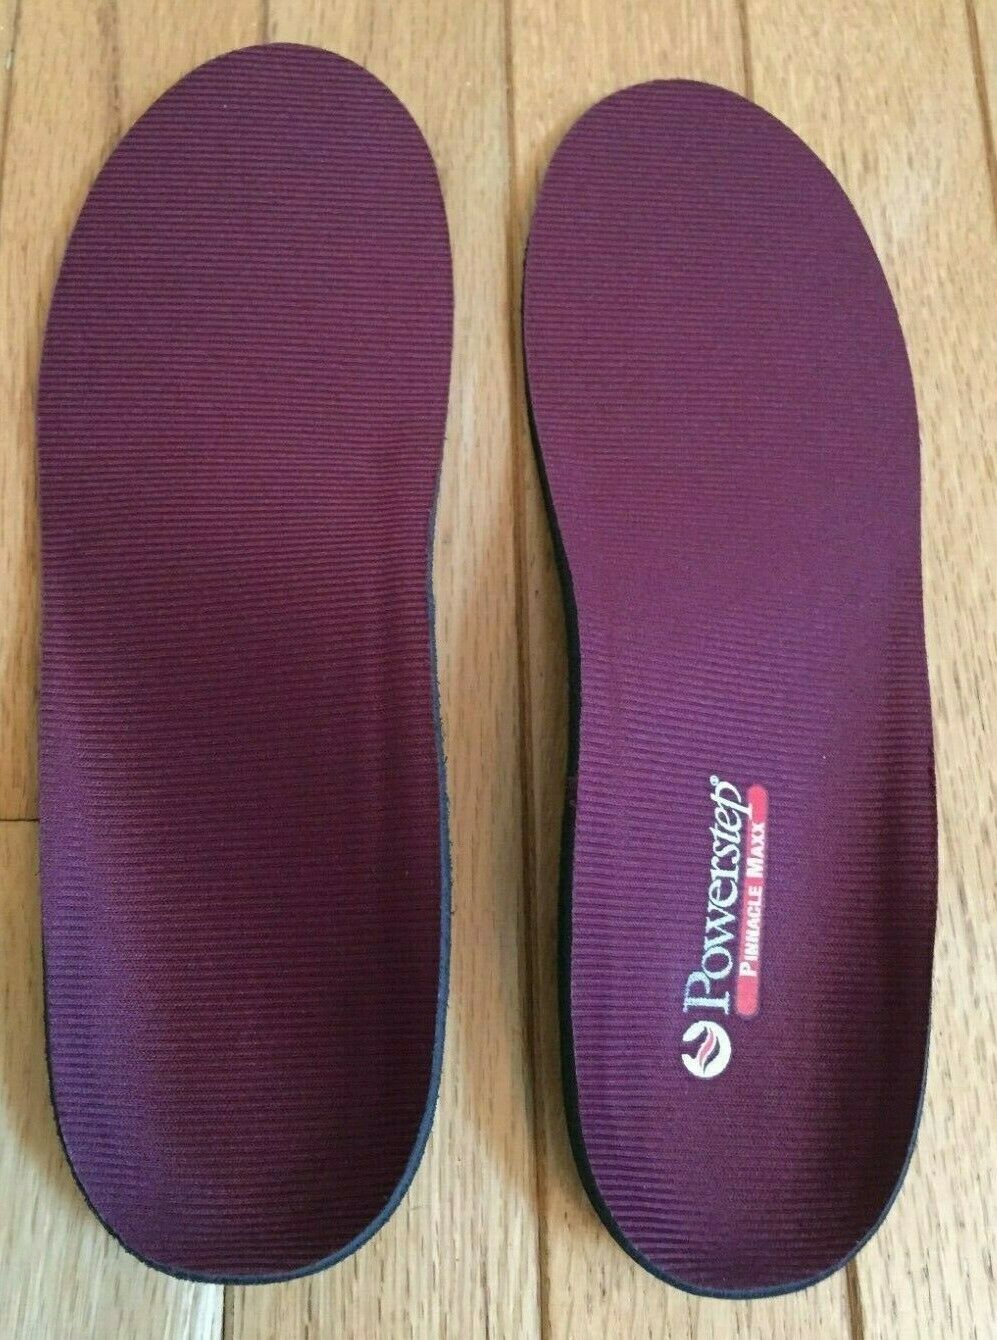 Powerstep Orthotics Pinnacle Maxx Foot Insoles Arch Support-free Shipping